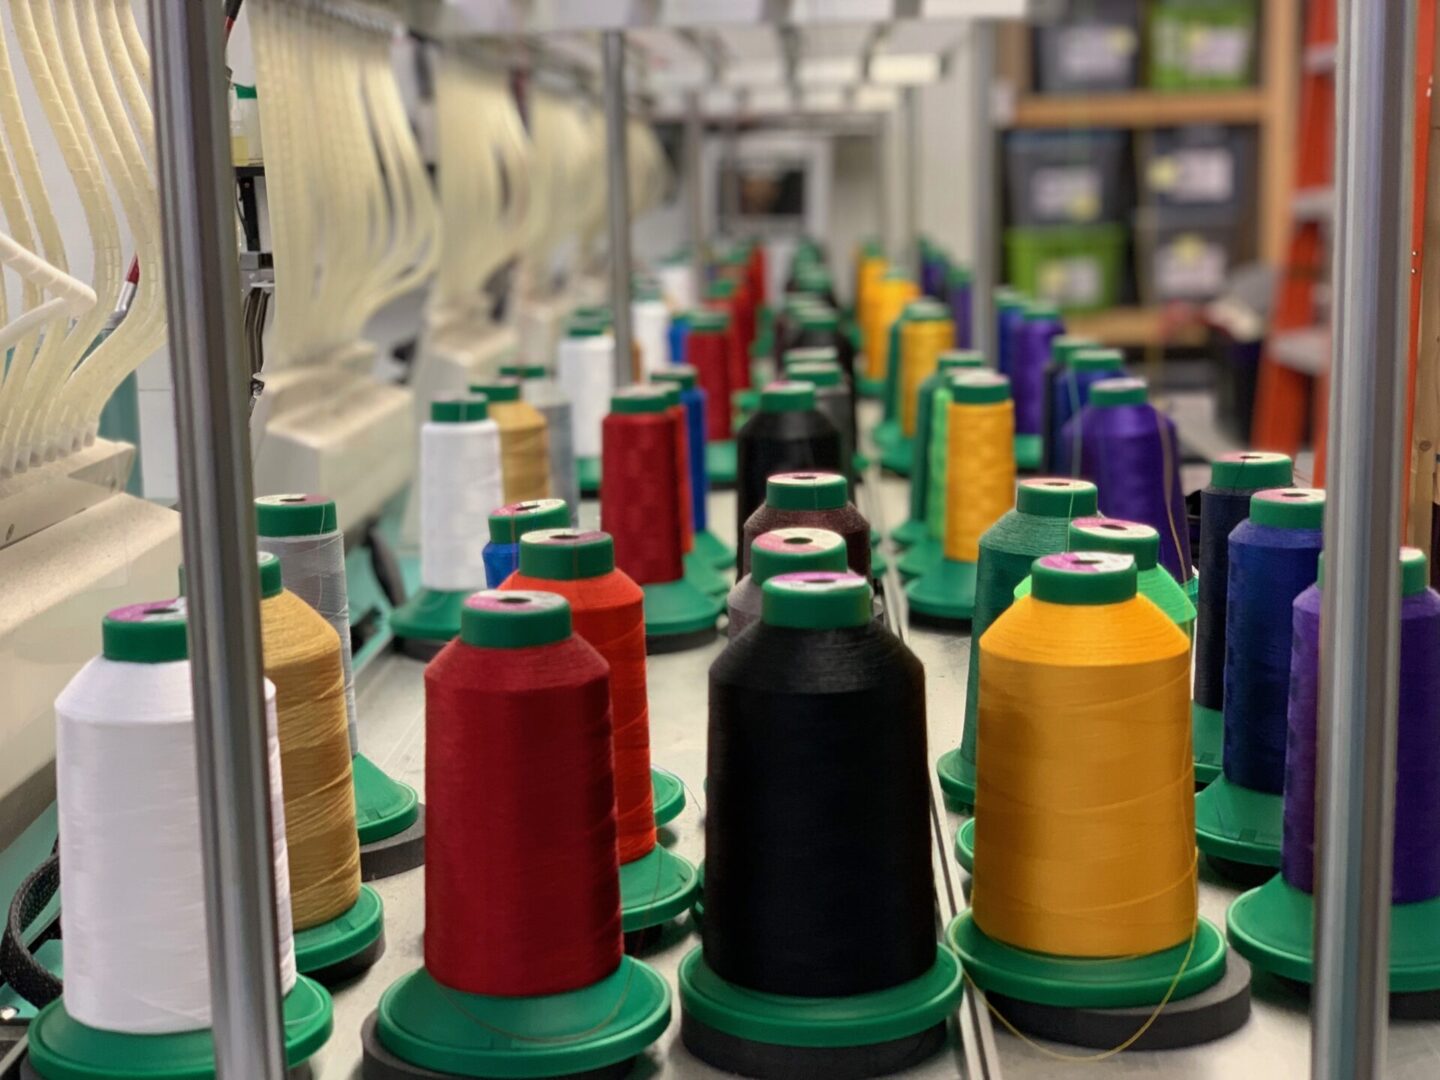 A row of spools of thread on a machine.